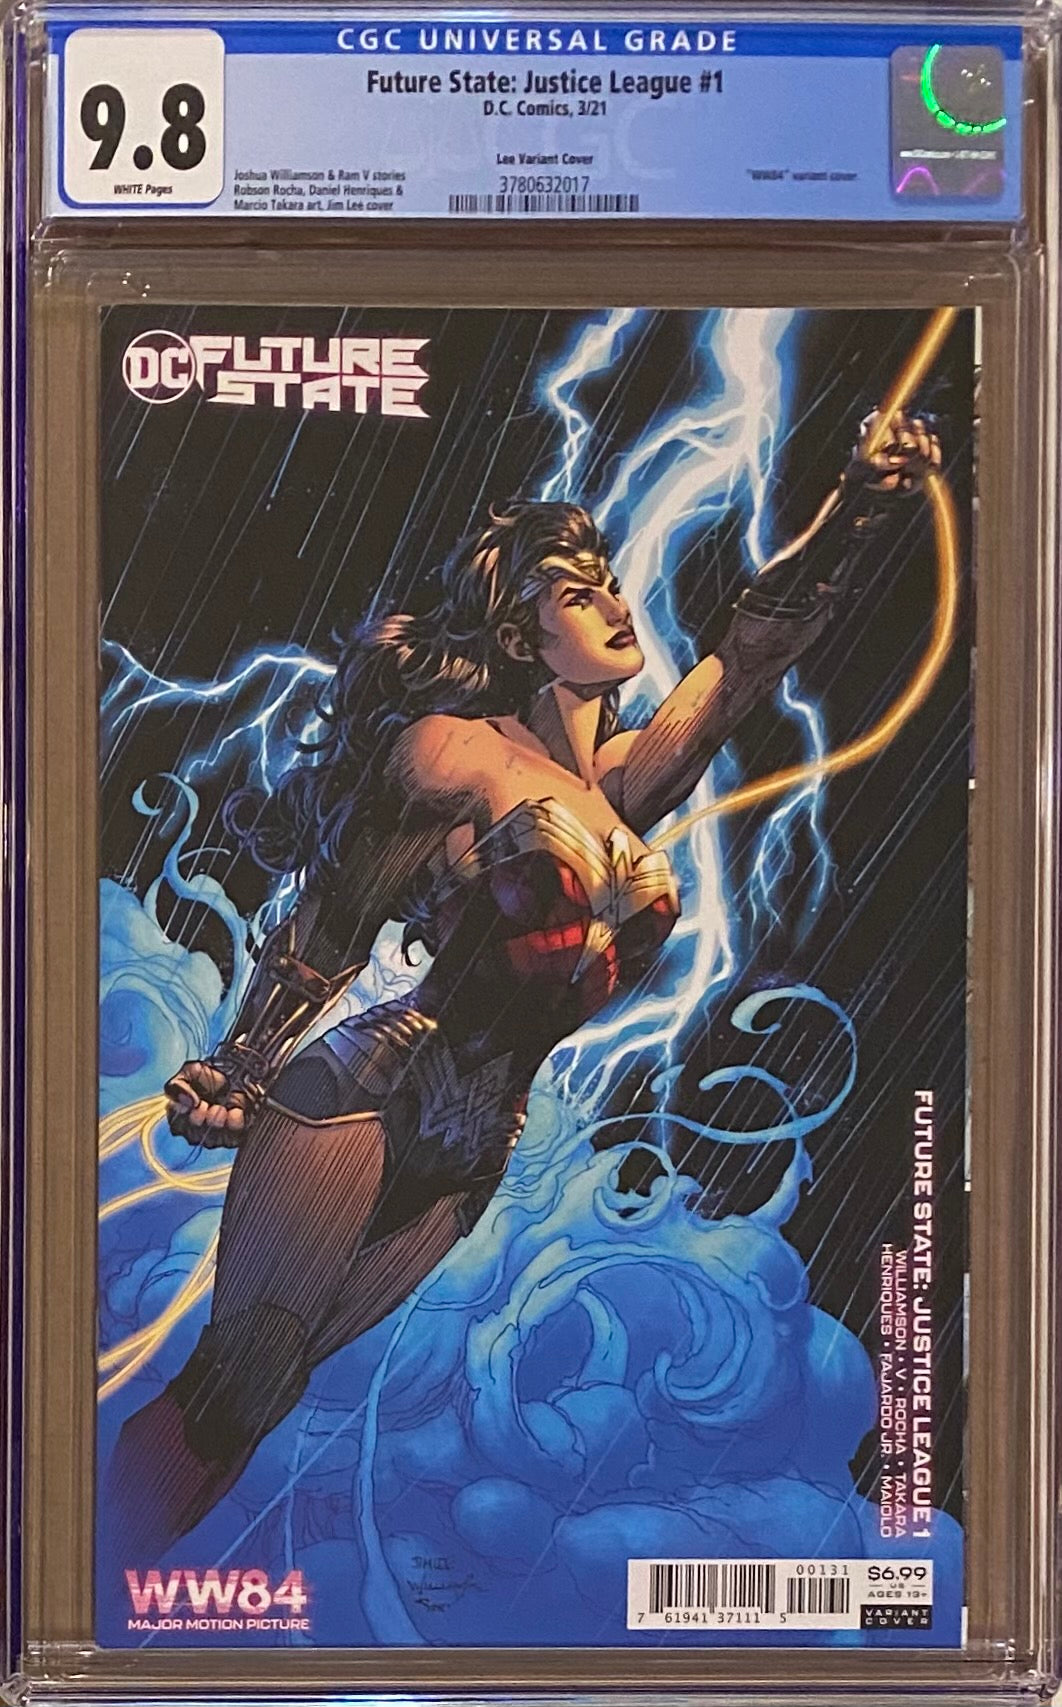 Future State: Justice League #1 Wonder Woman 1984 Variant CGC 9.8